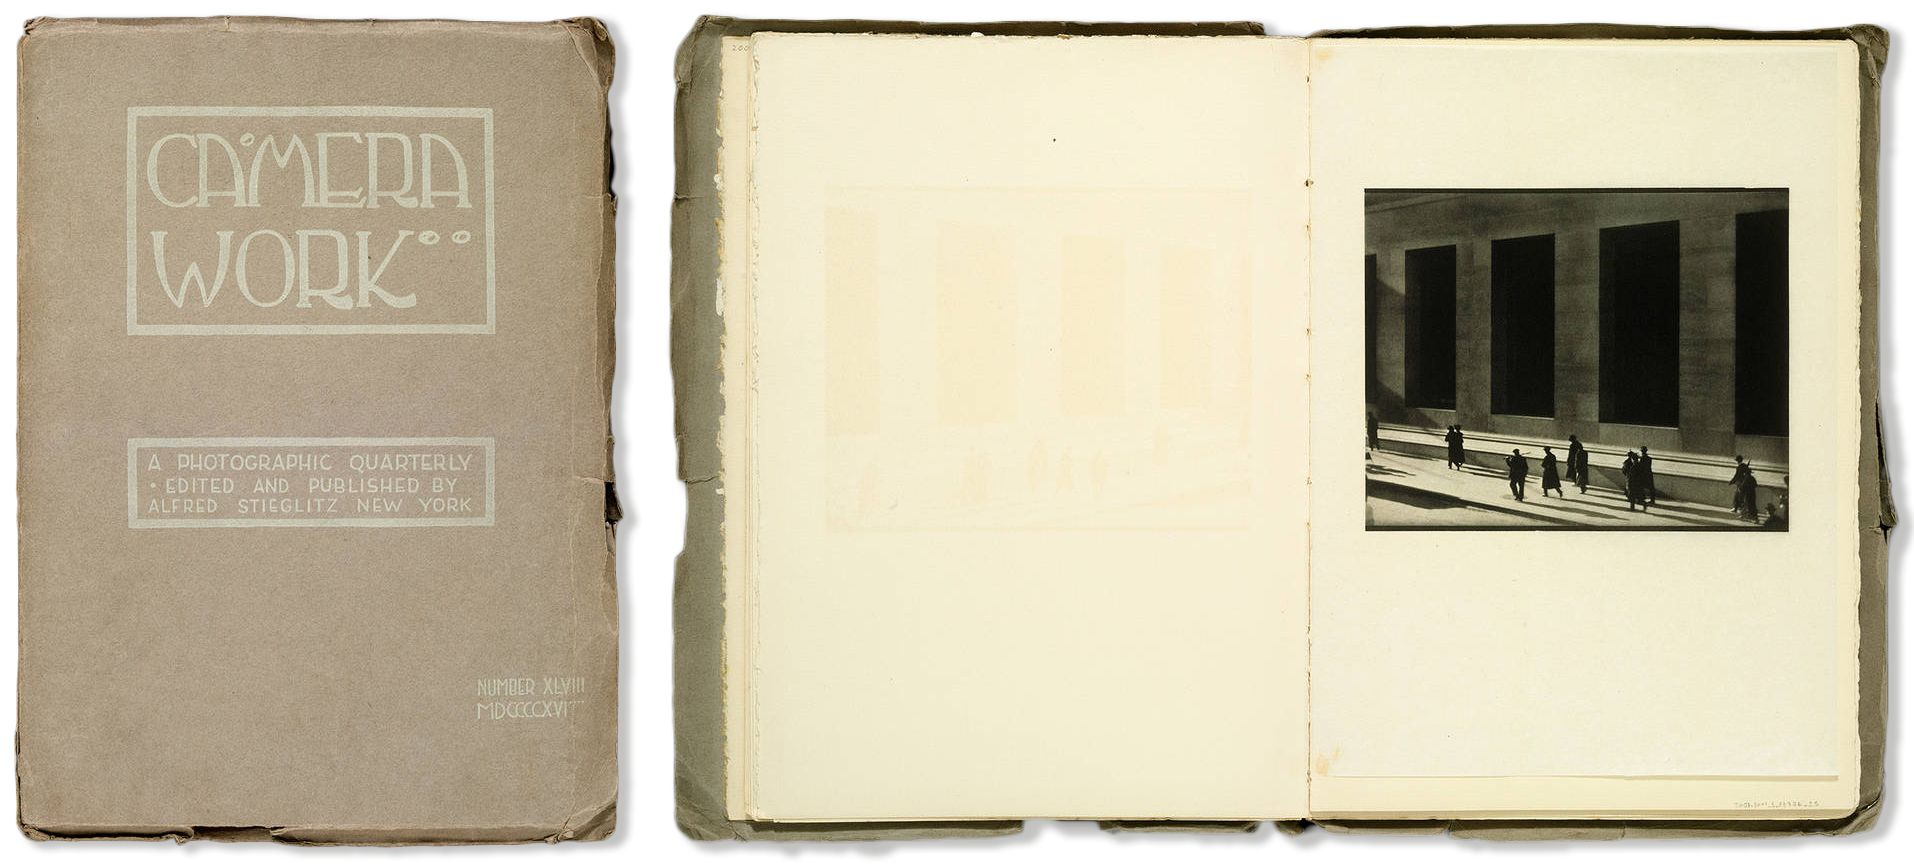 Left: Cover of Camera Work: A Photographic Quarterly, no. 48 (October 1916), published and edited by Alfred Stieglitz, Victoria & Albert Museum, London, U.K. Right: Spread from Camera Work: A Photographic Quarterly, no. 48 (October 1916), featuring Paul Strand, <em>New York</em>, 1916, Victoria & Albert Museum, London.